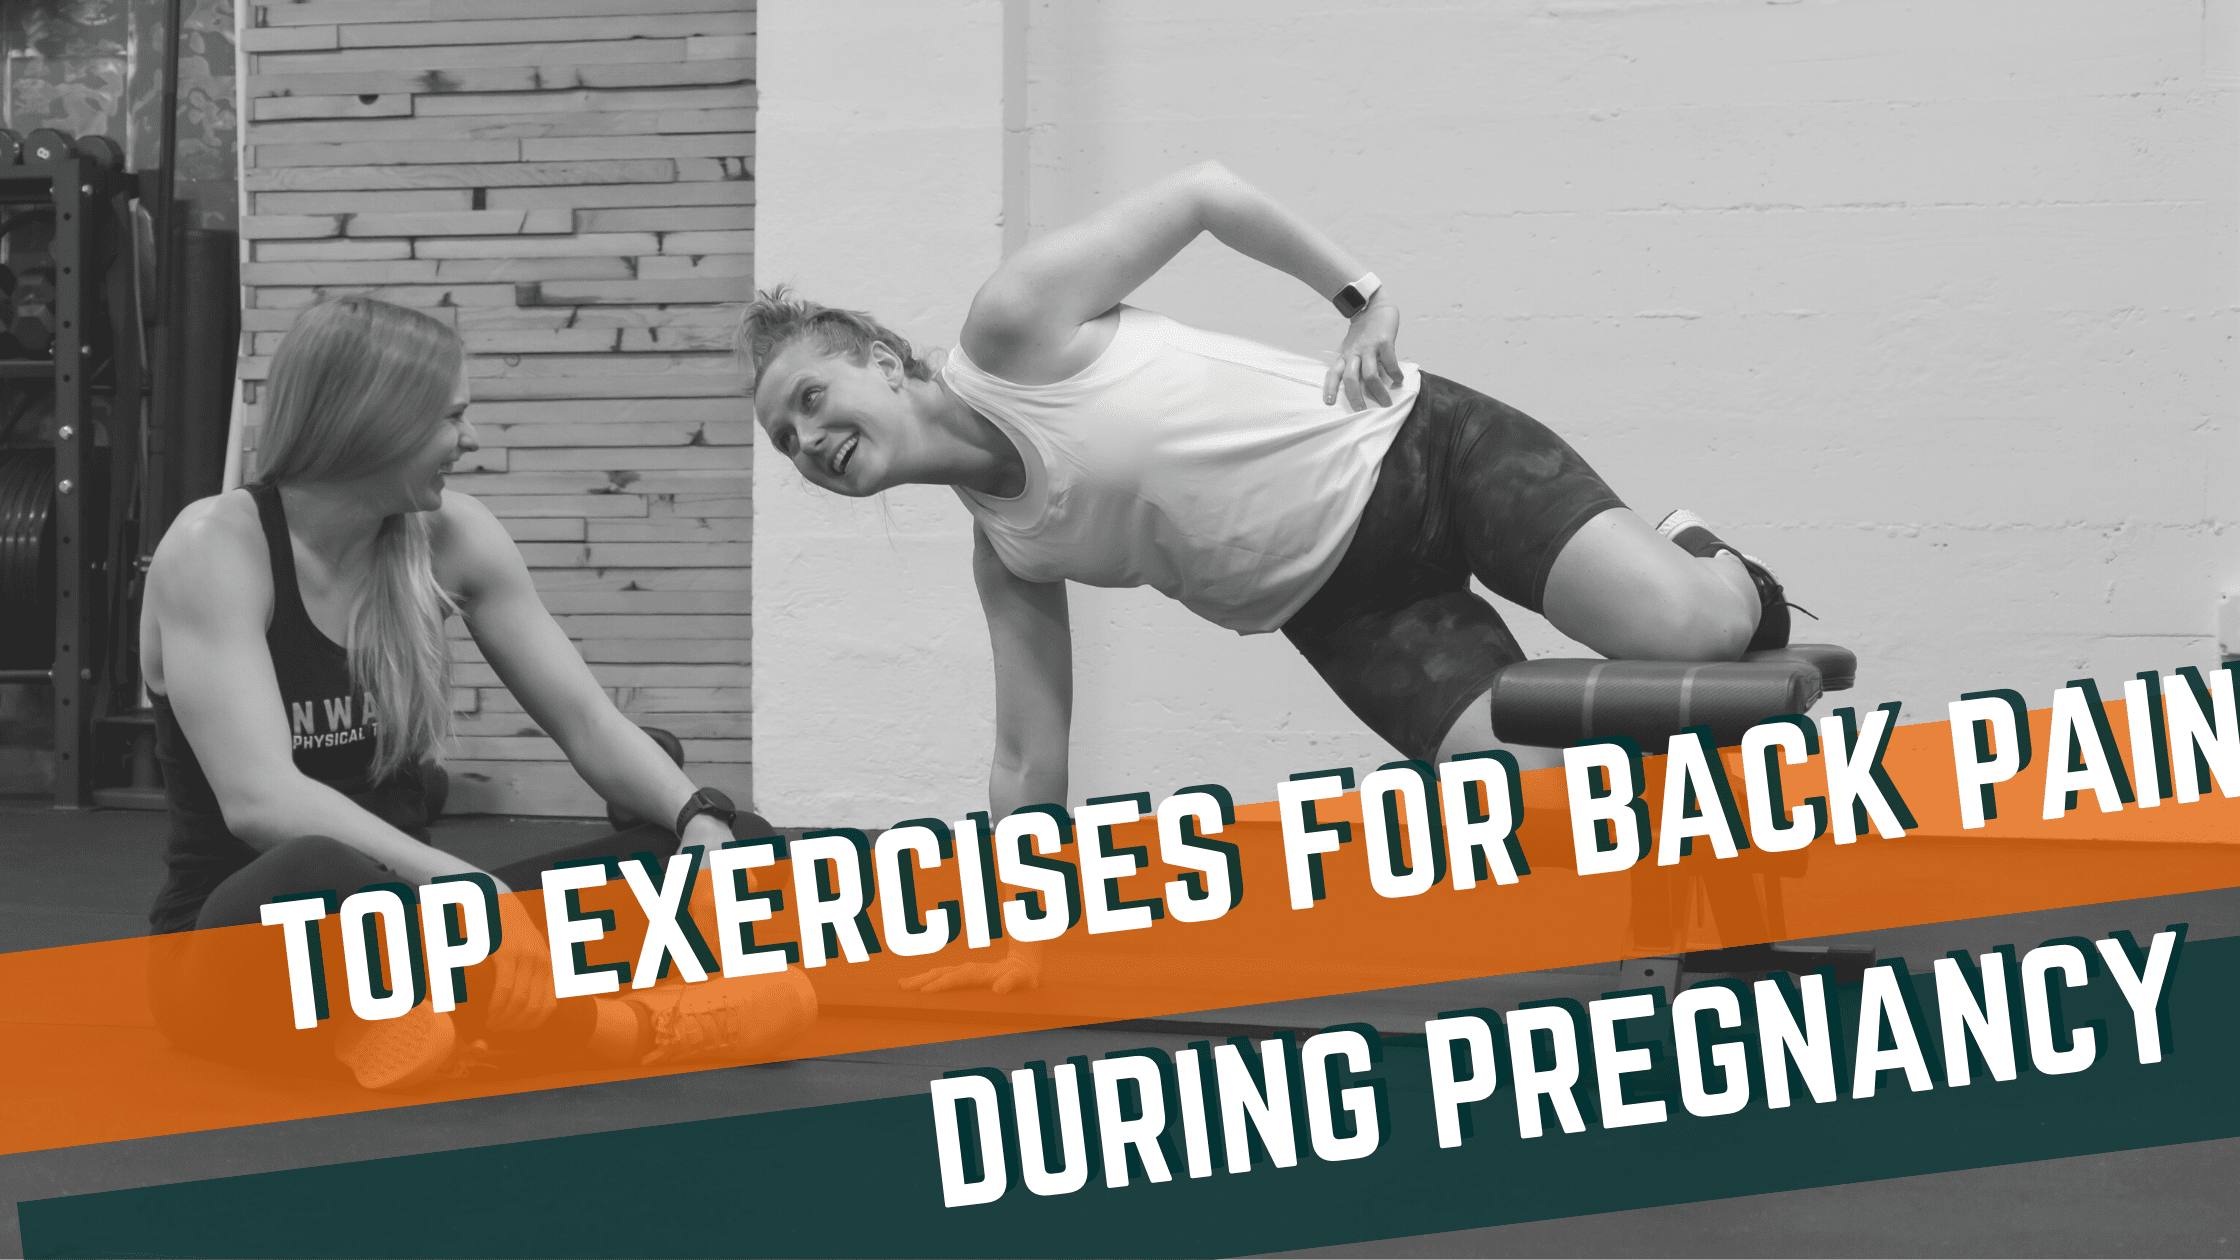 Featured image for “Top 5 Exercises for Back Pain During Pregnancy”